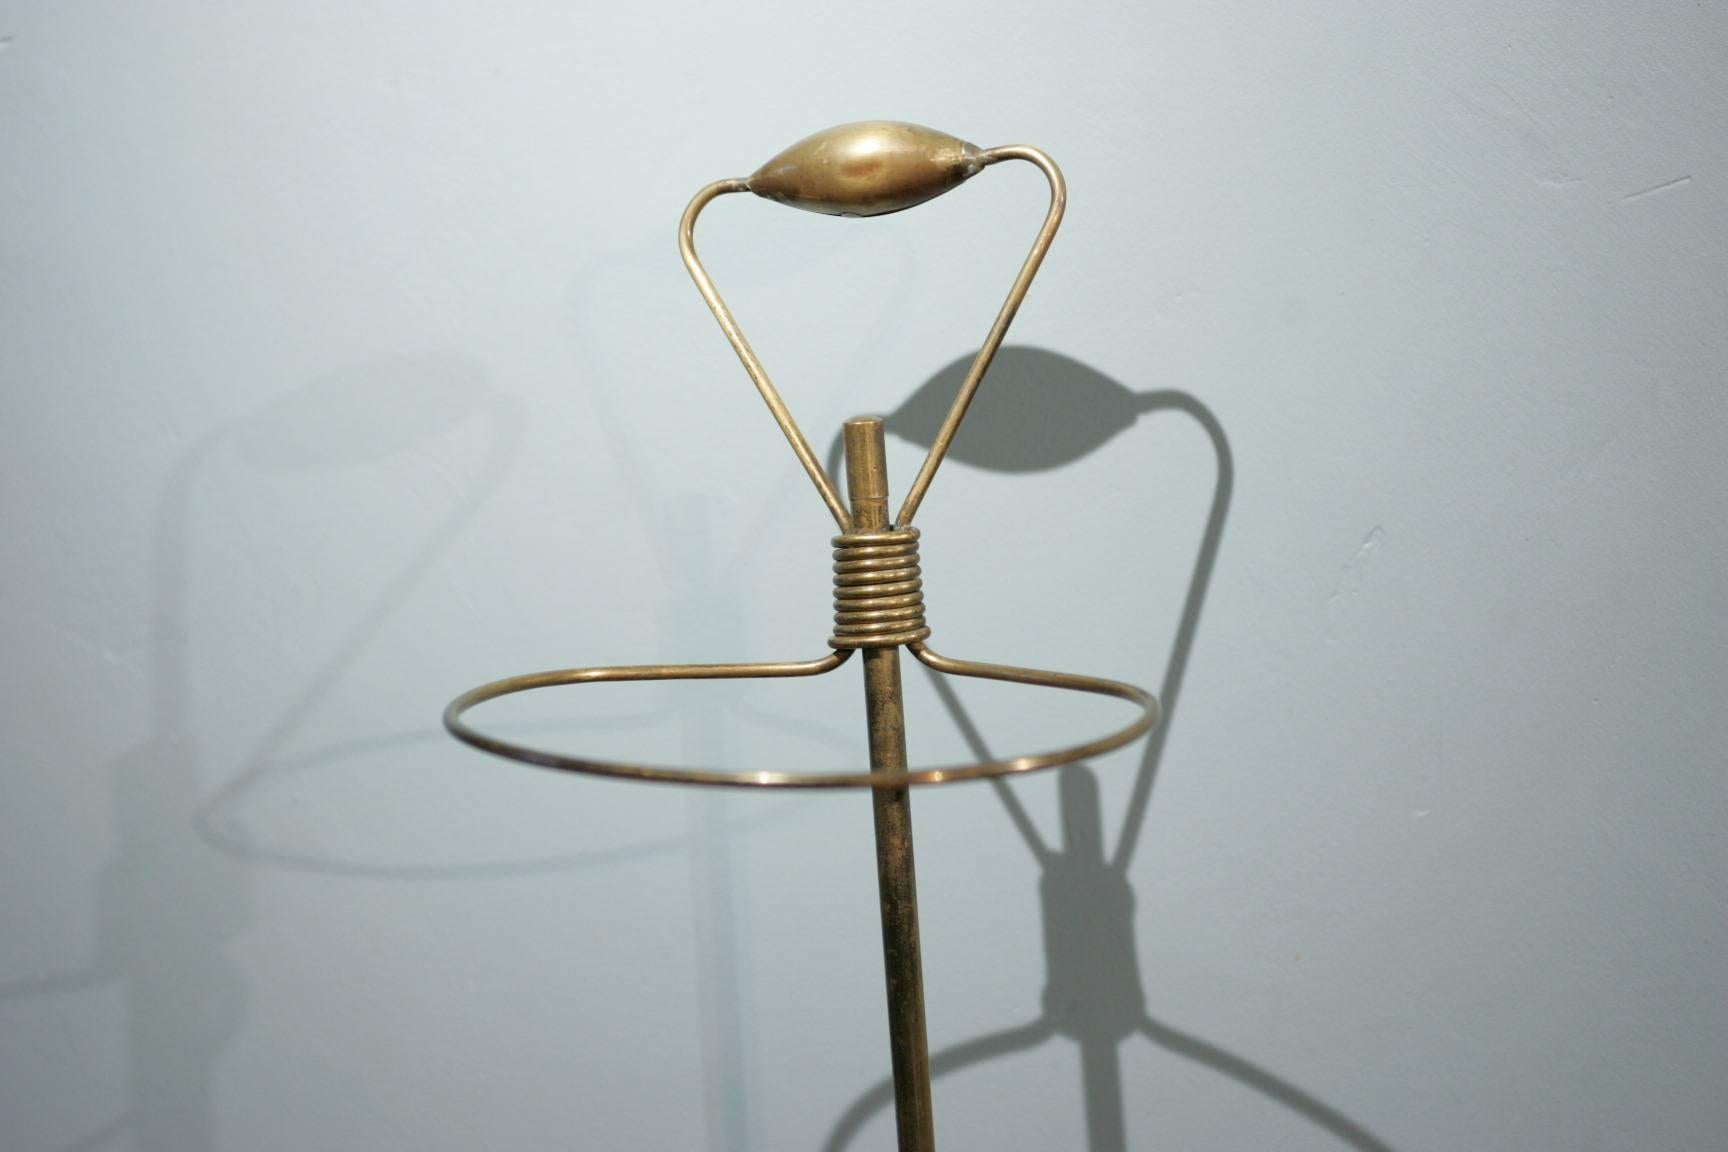 An original umbrella-Stand by Mathieu Mategot made of brass and black steel in good condition from 1950.